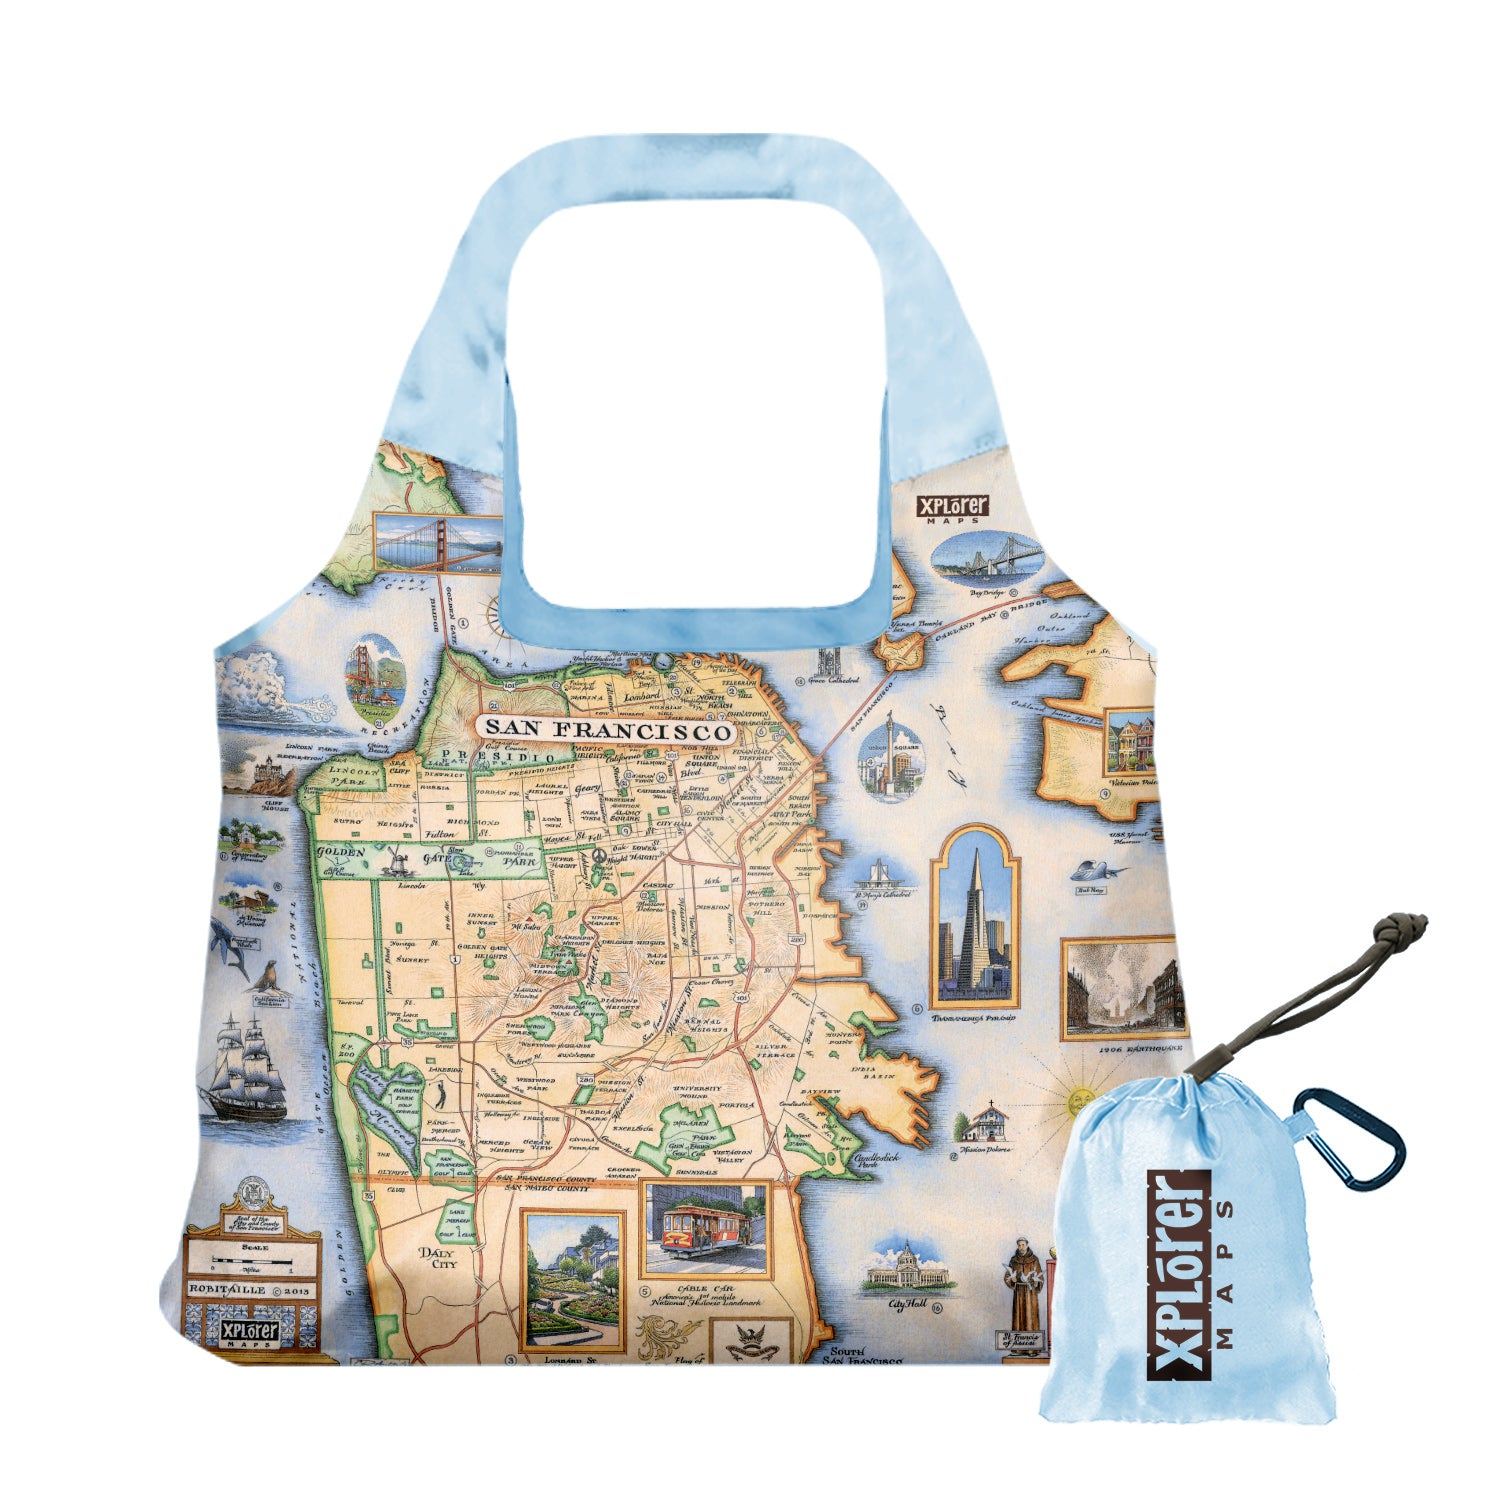 San Francisco Bay Map Pouch Tote Bags by Xplorer Maps. The map features illustrations of places such as Candlestick Park, Fisherman's Wharf, Transamerica Pyramid, and Alcatraz Island. Flora and fauna include octopus, crab, palm trees, and a dahlia. 